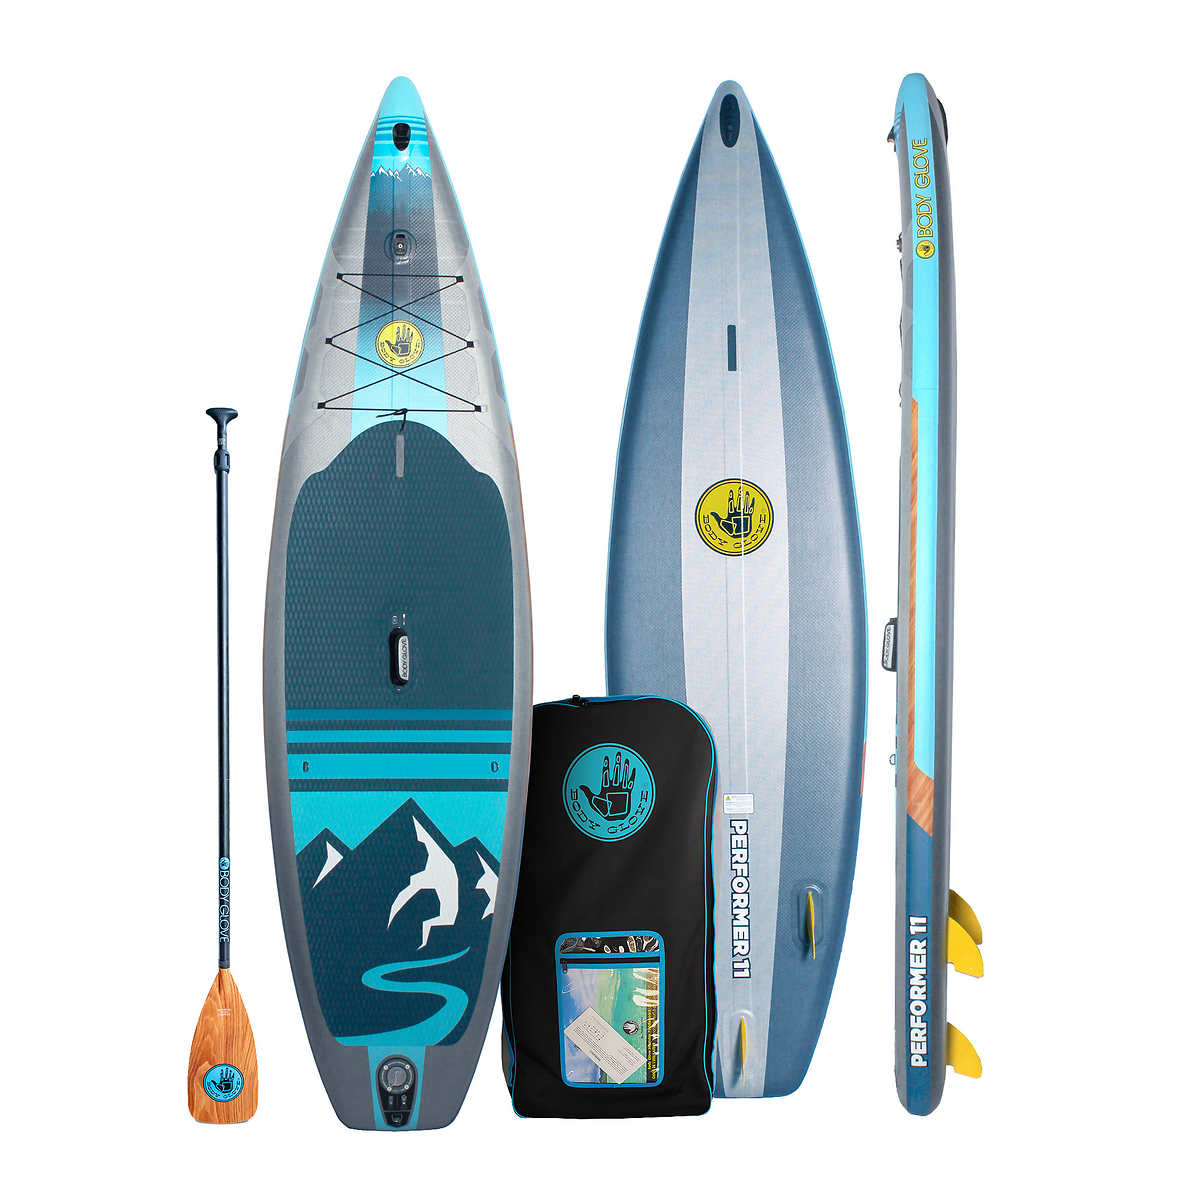 Body Glove Performer 11' Inflatable Stand Up Paddleboard Package - Costco - $299.97